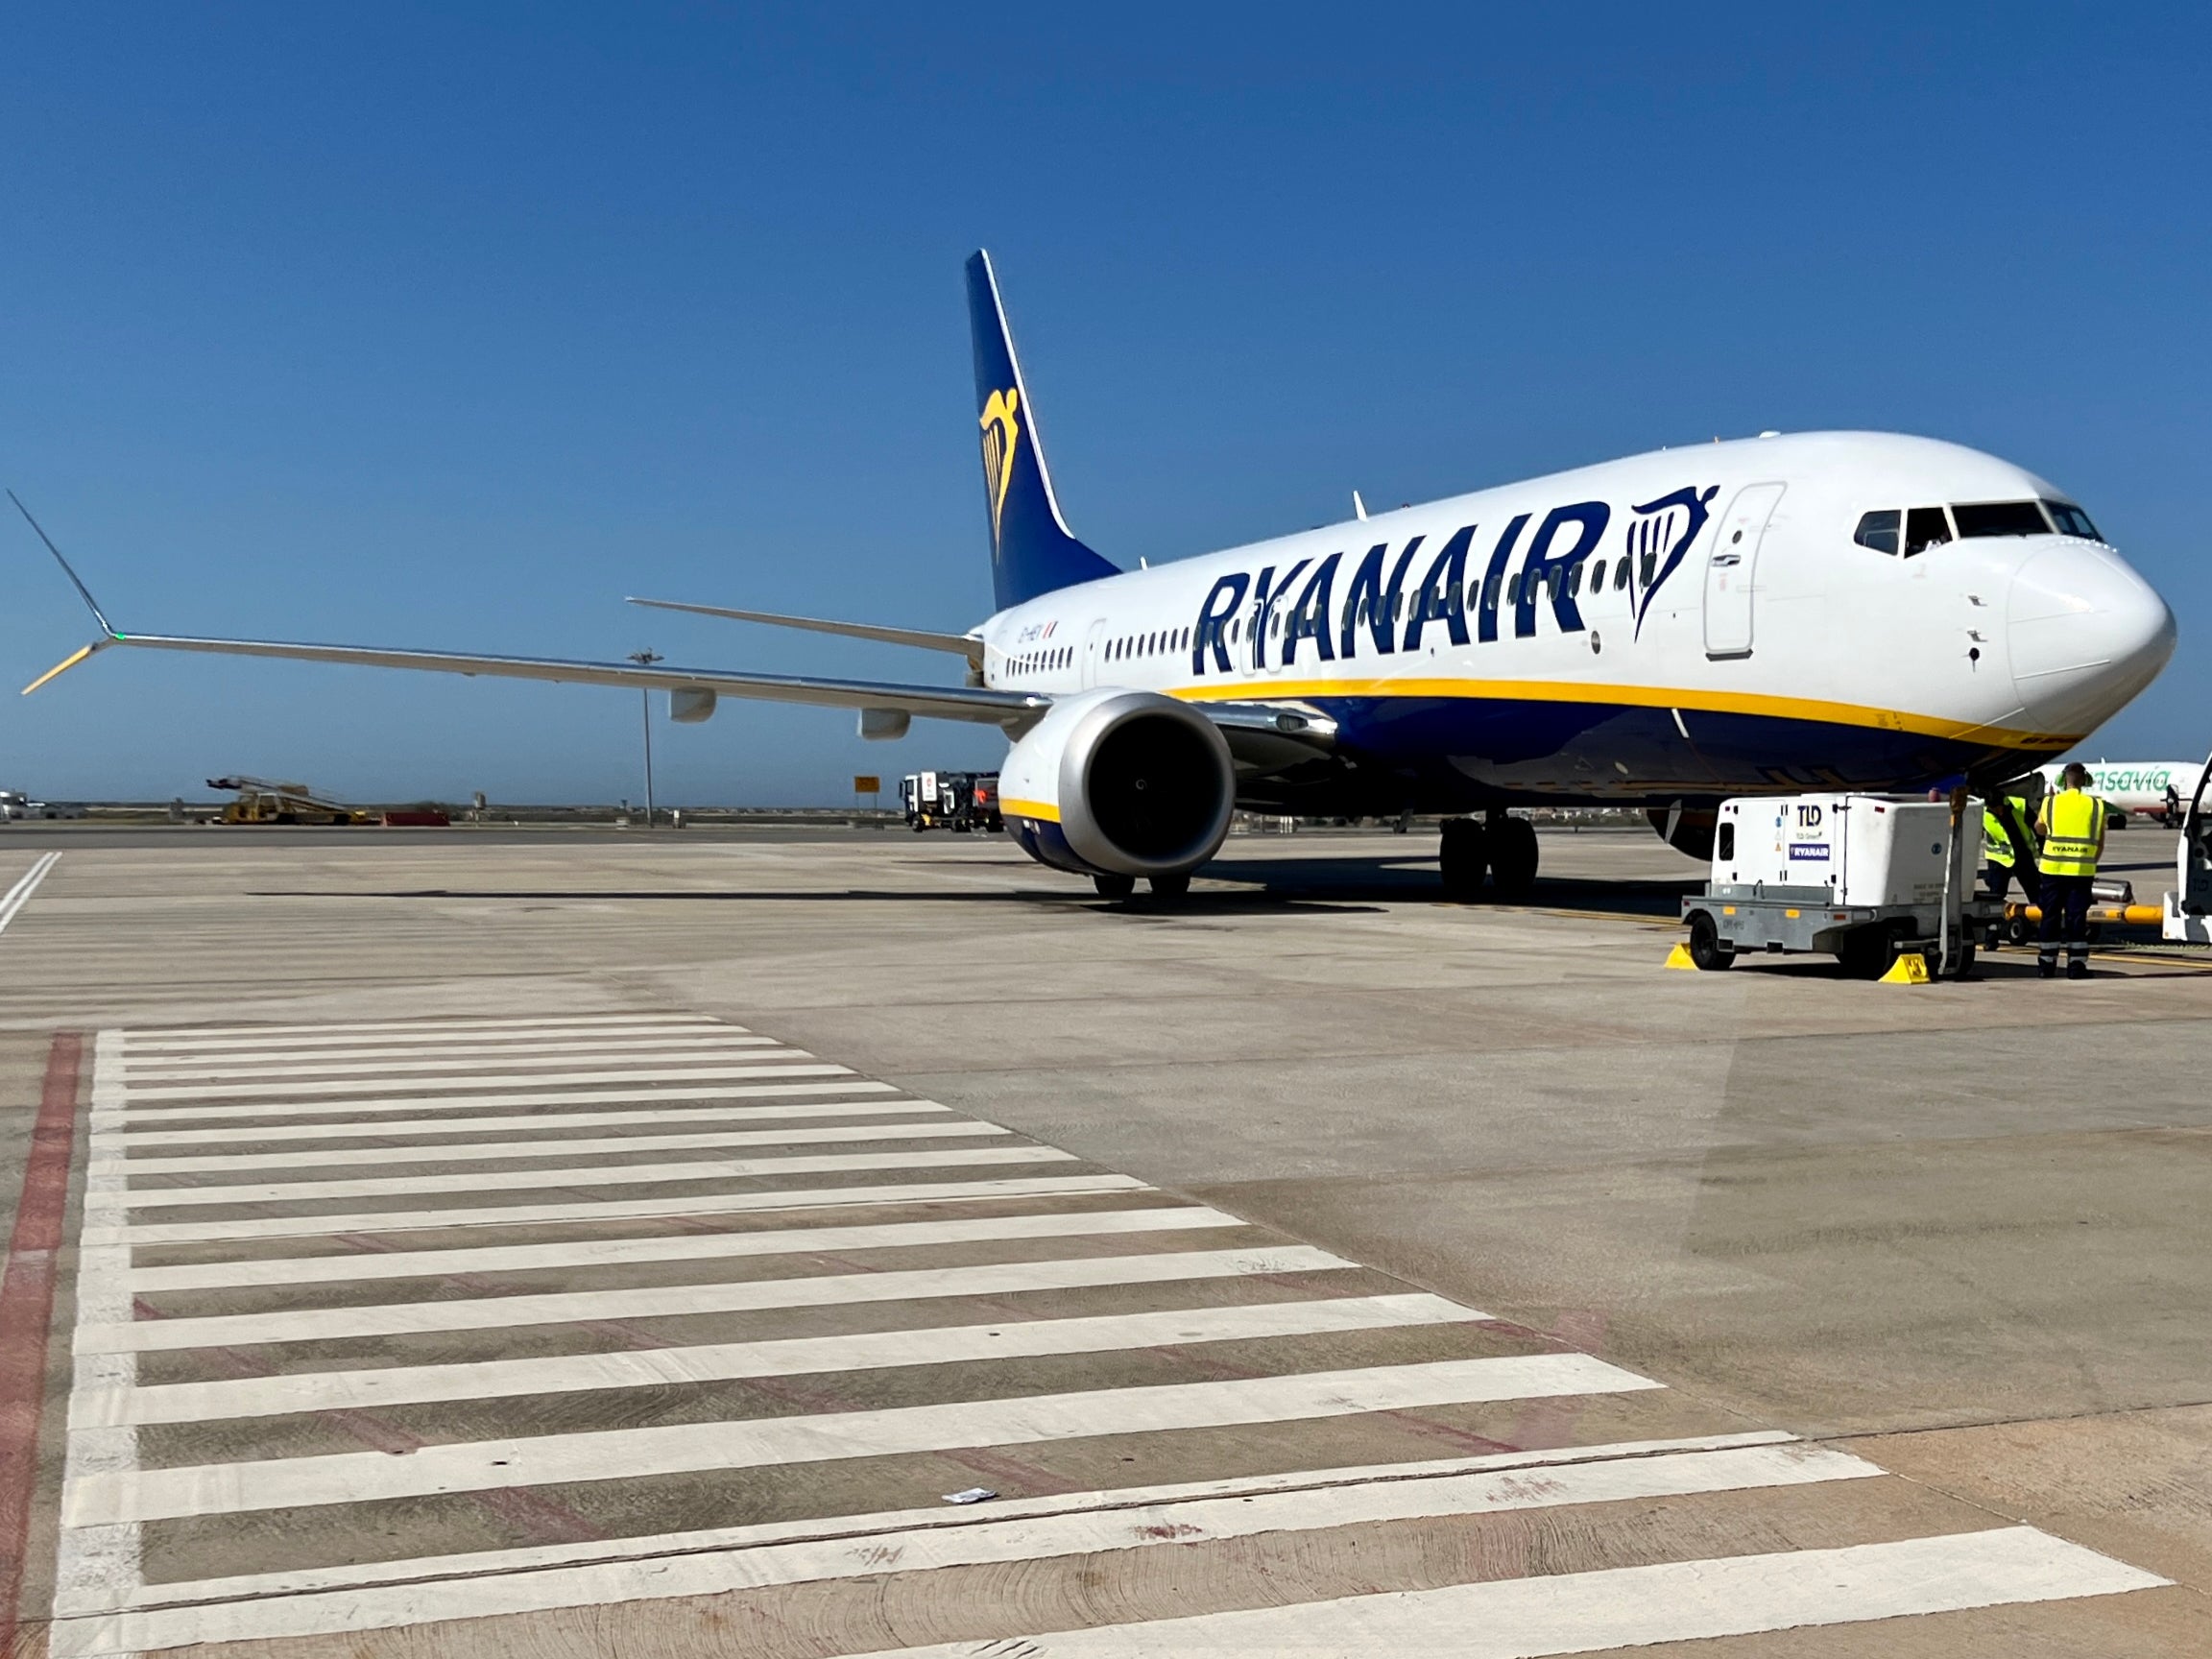 En route: a Boeing 737-8200 designed for Ryanair, at Faro airport in Portugal